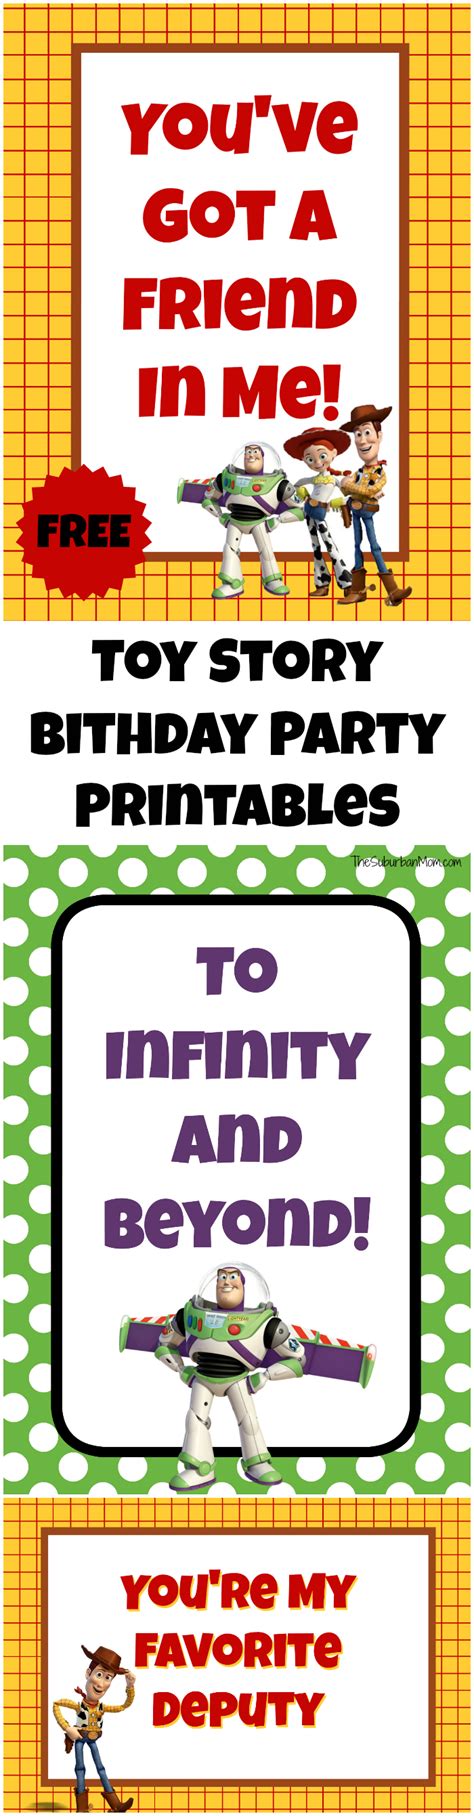 Free Toy Story Birthday Party Printables